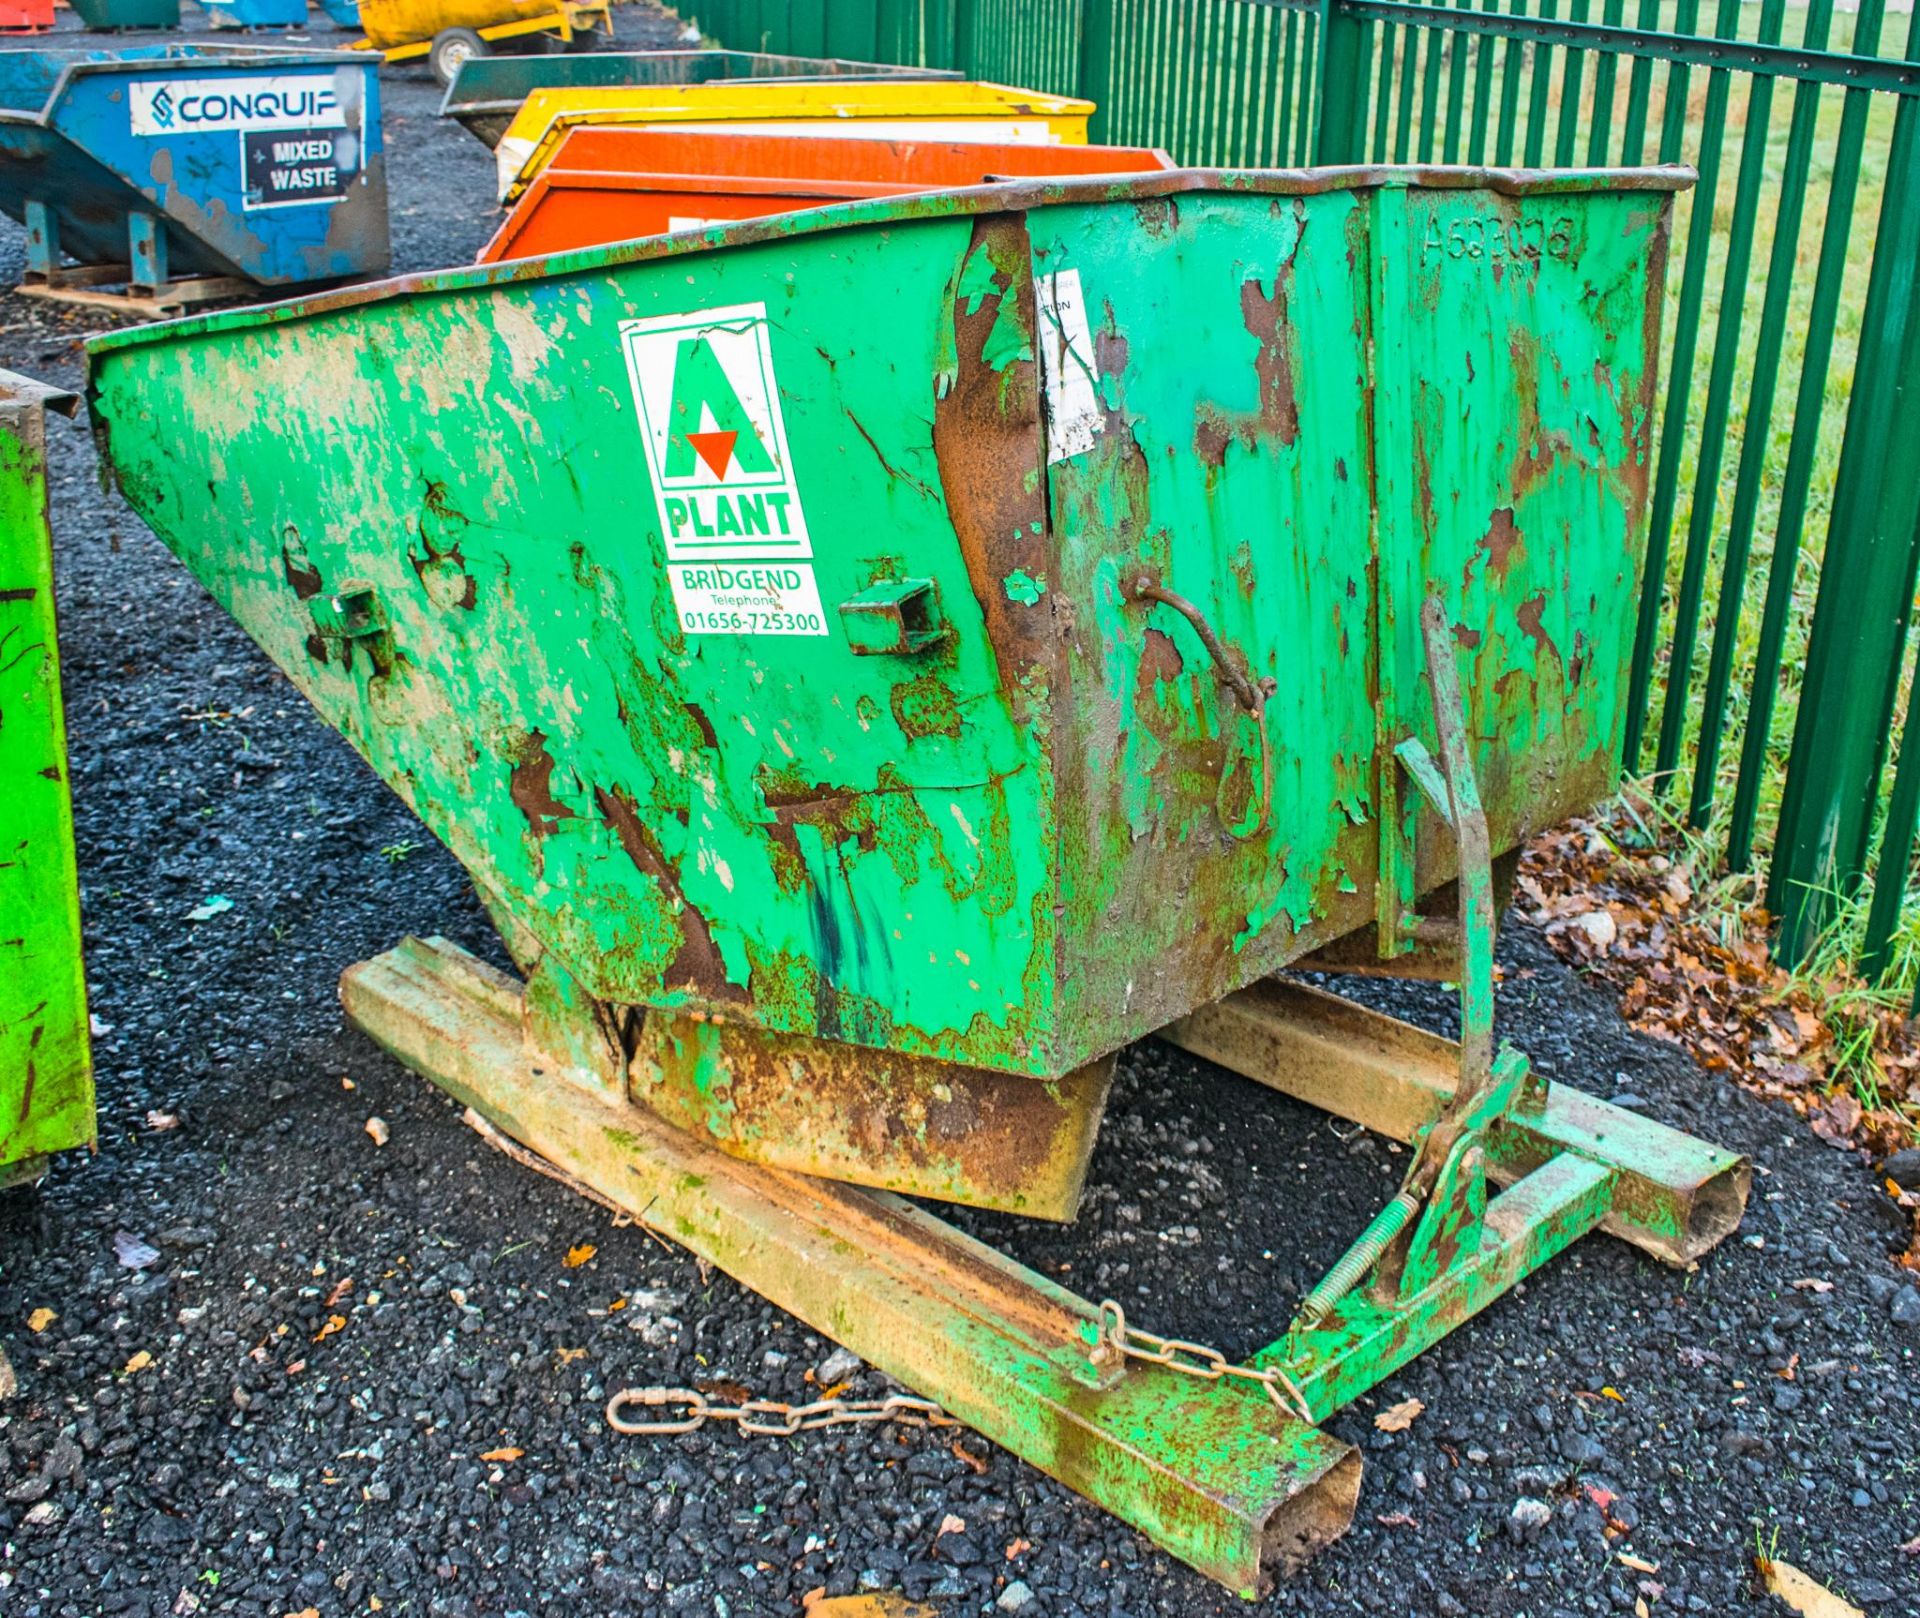 Conquip tipping skip A623026 - Image 2 of 2